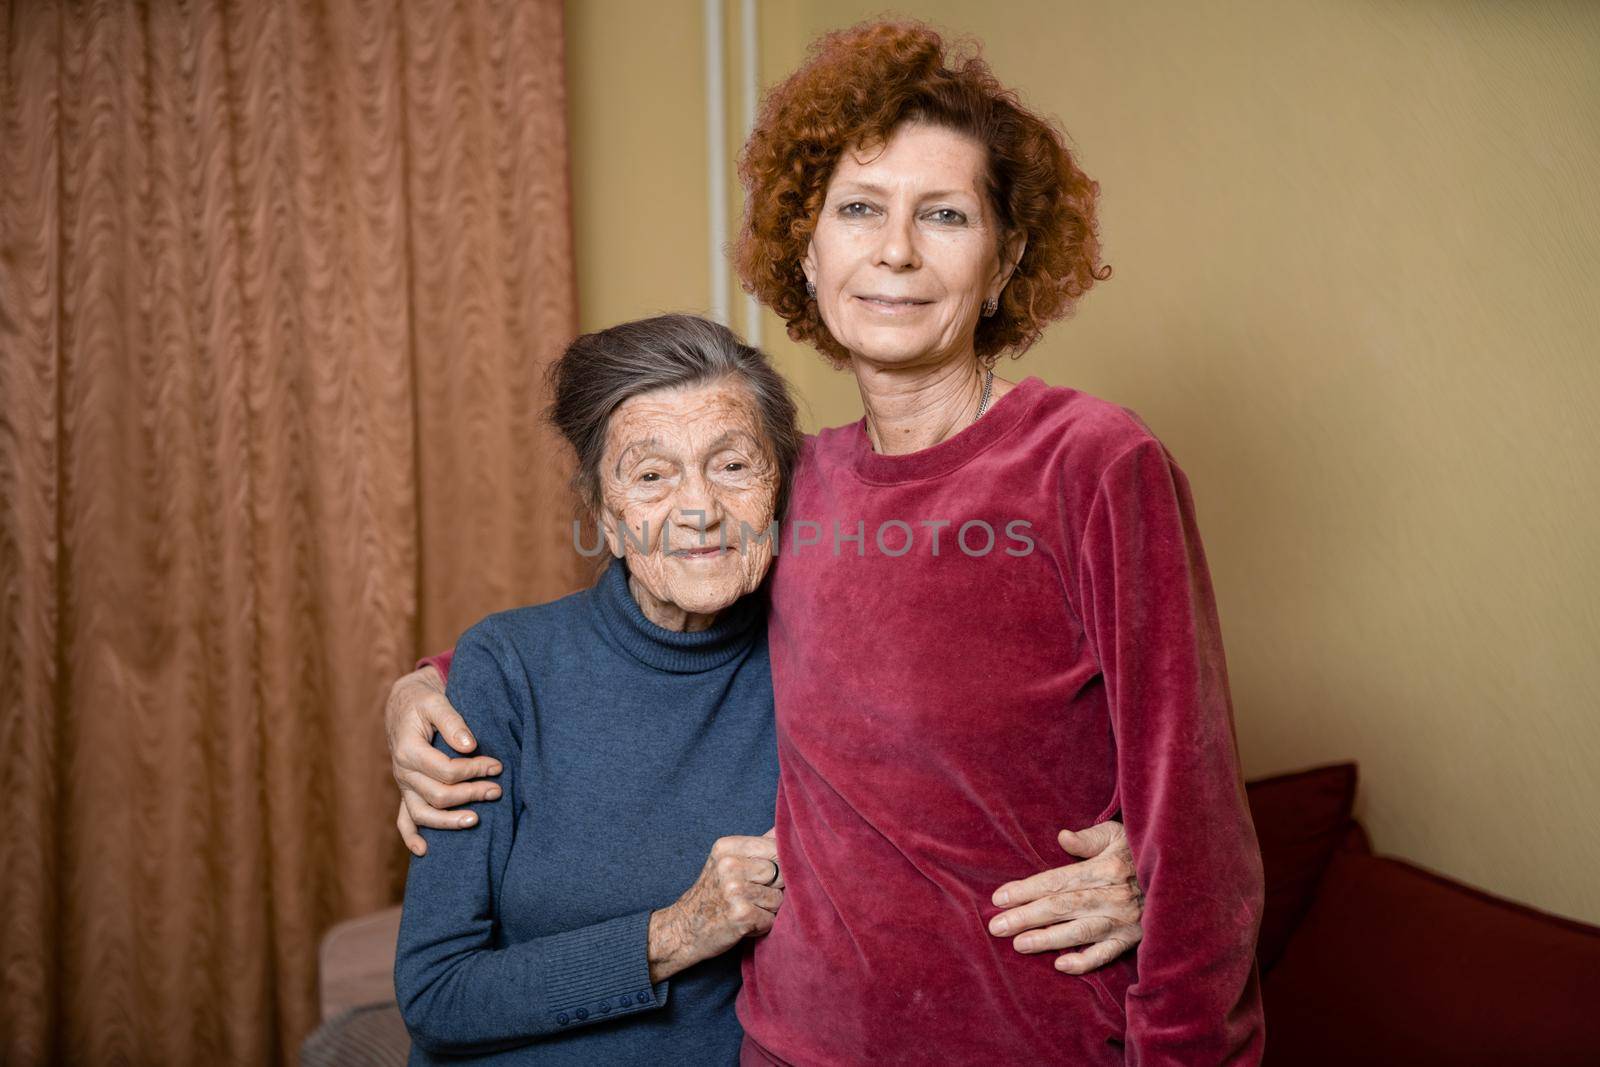 Adult daughter takes care of elderly mother suffering from dementia, old woman ninety years age gray hair and wrinkles on face and sweet kind smile, family idyll caring for elderly, hug each other by Tomashevska